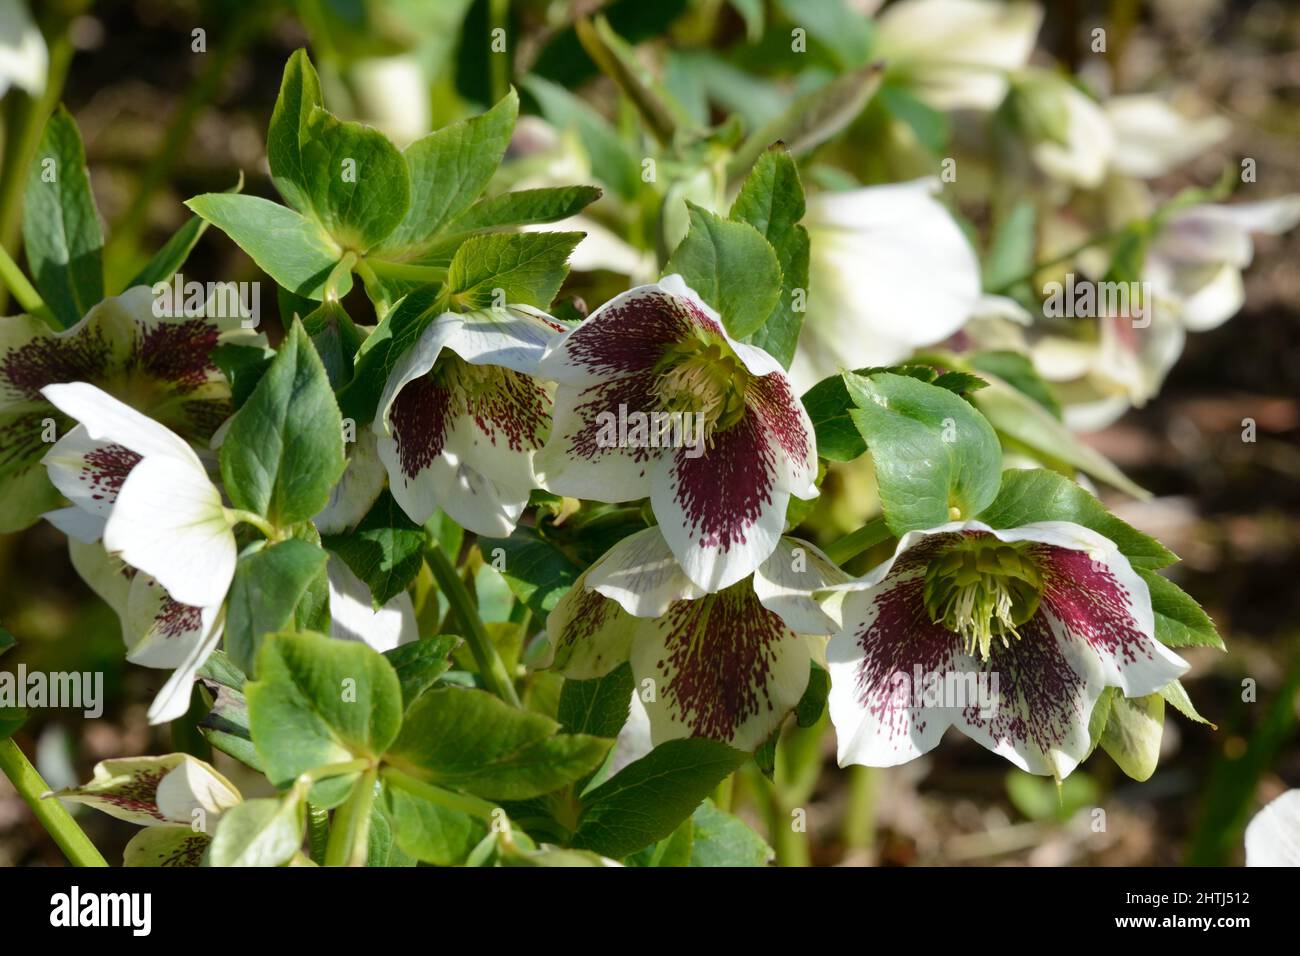 Helleborus x hybridus White Lady Spotted Christmas rose flowers cup shaped white flowers with red spots and yellow stamens Stock Photo